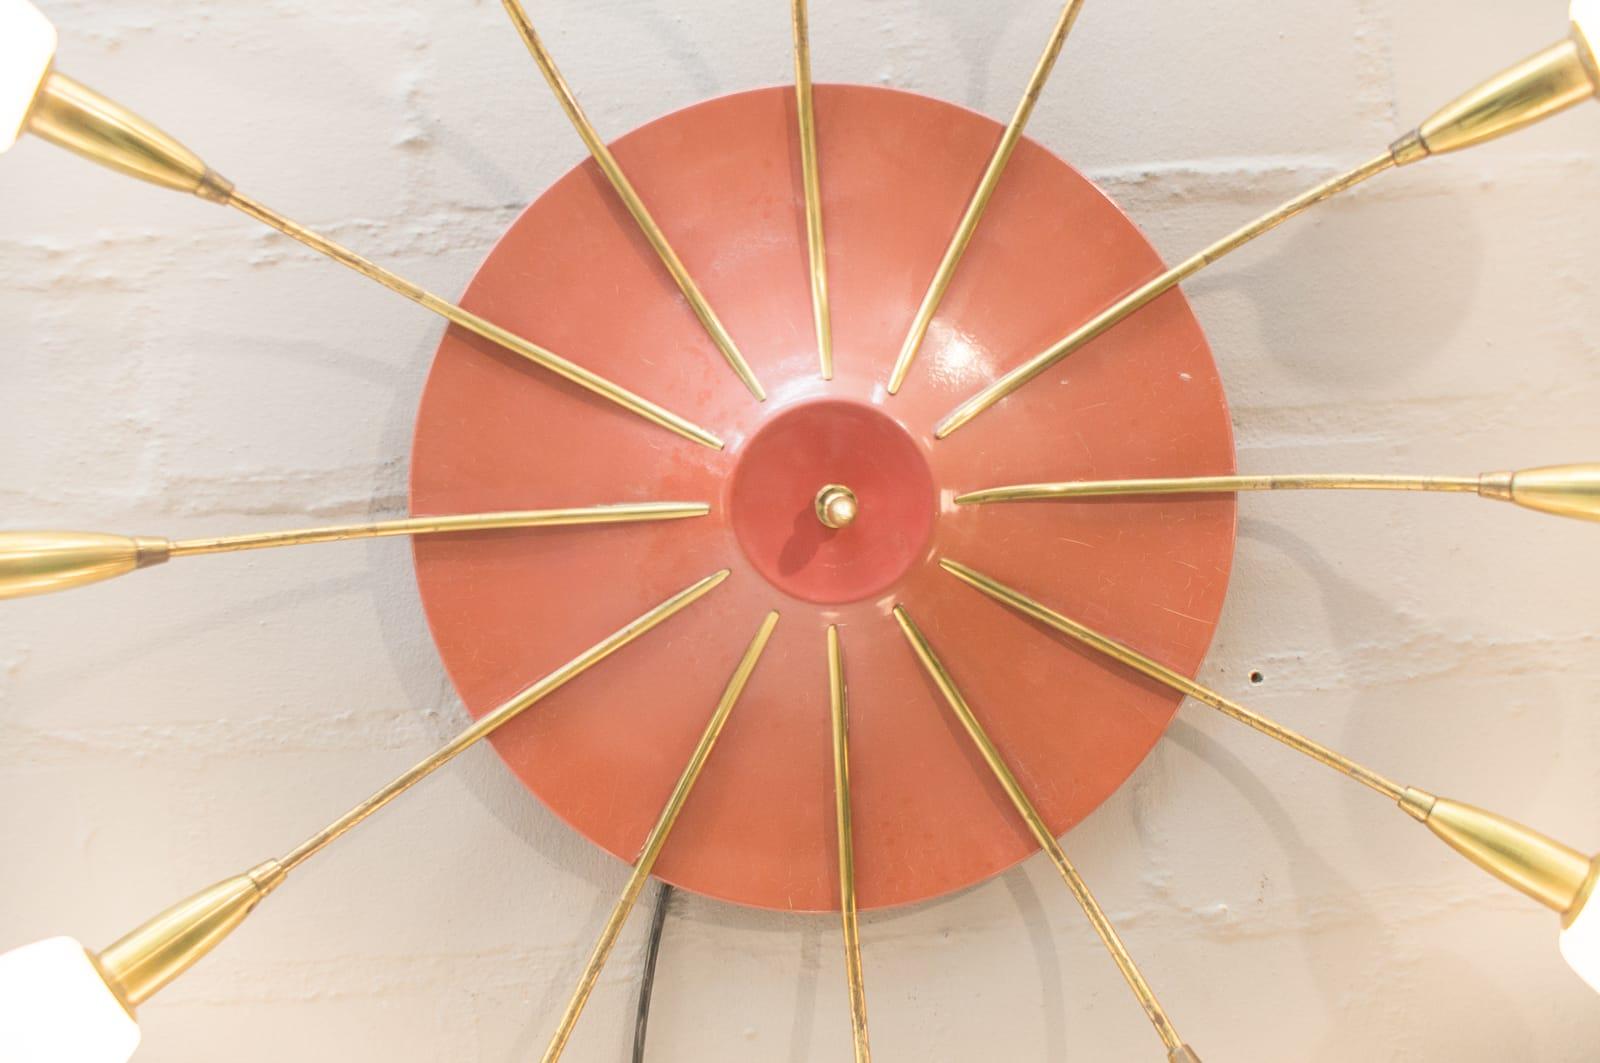 Large Midcentury Wall or Ceiling Sputnik Lamp with 12 Arms, 1950s For Sale 1